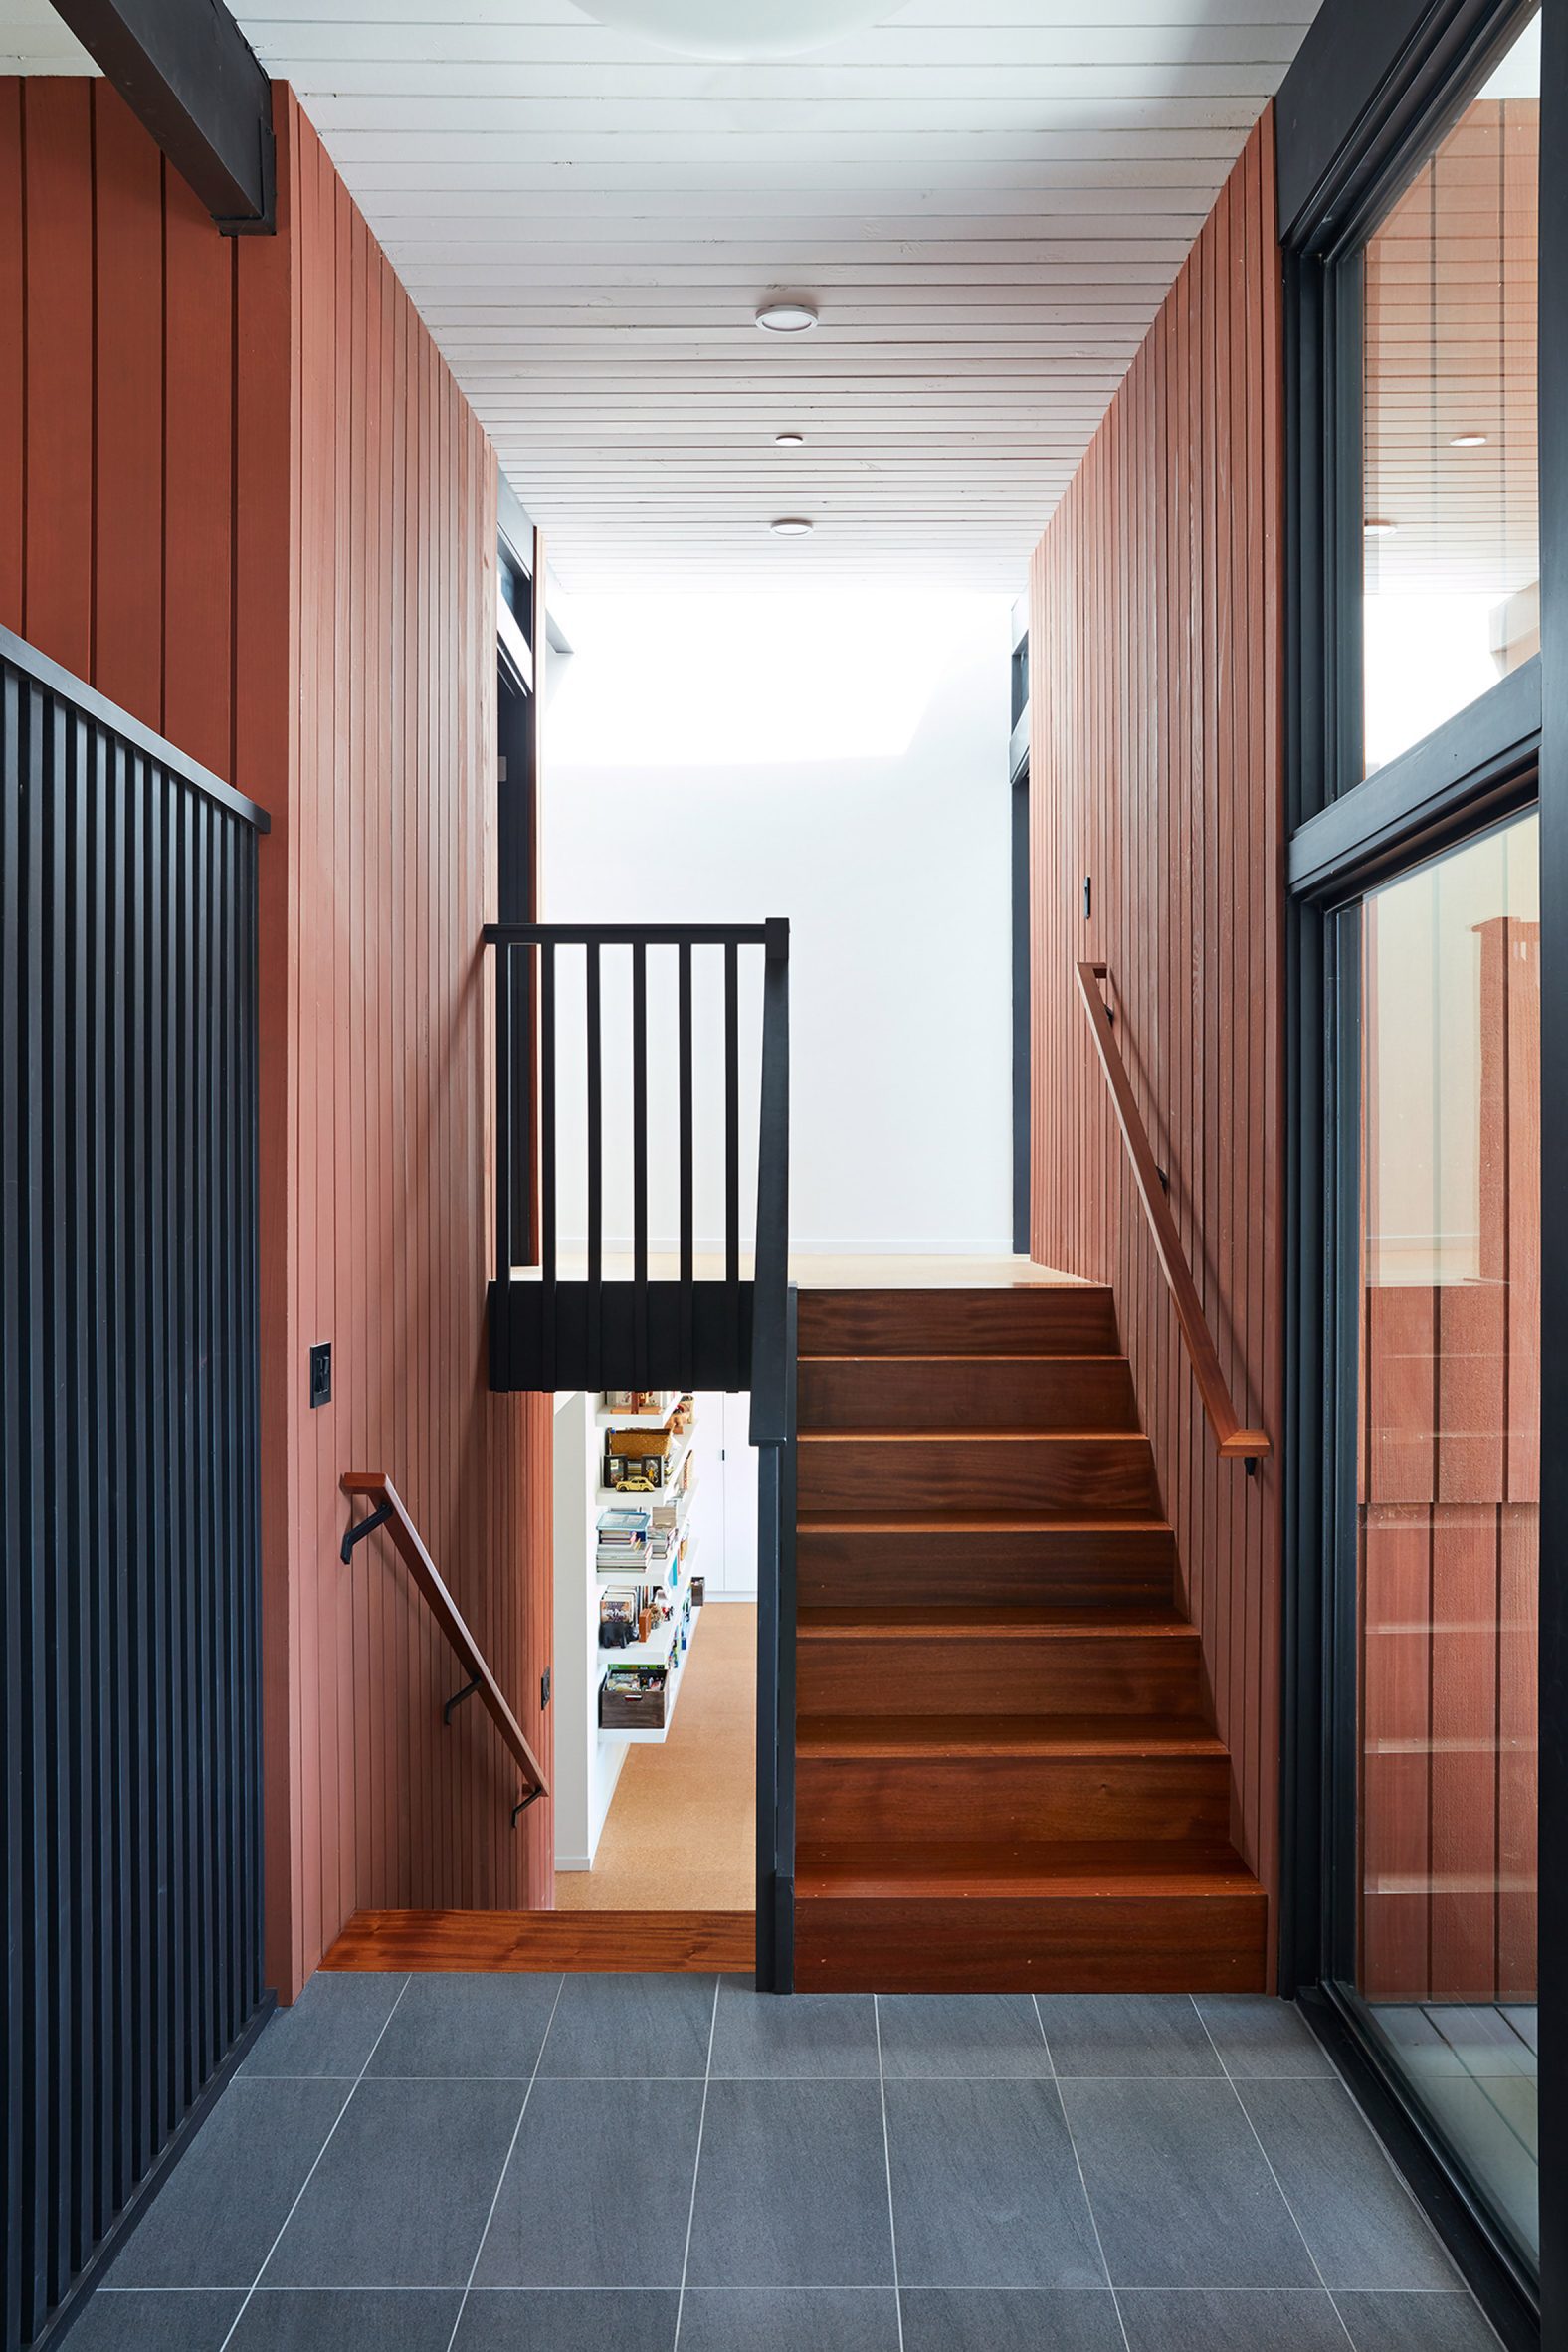 Klopf Architecture added a second staircase to the mid-century renovation